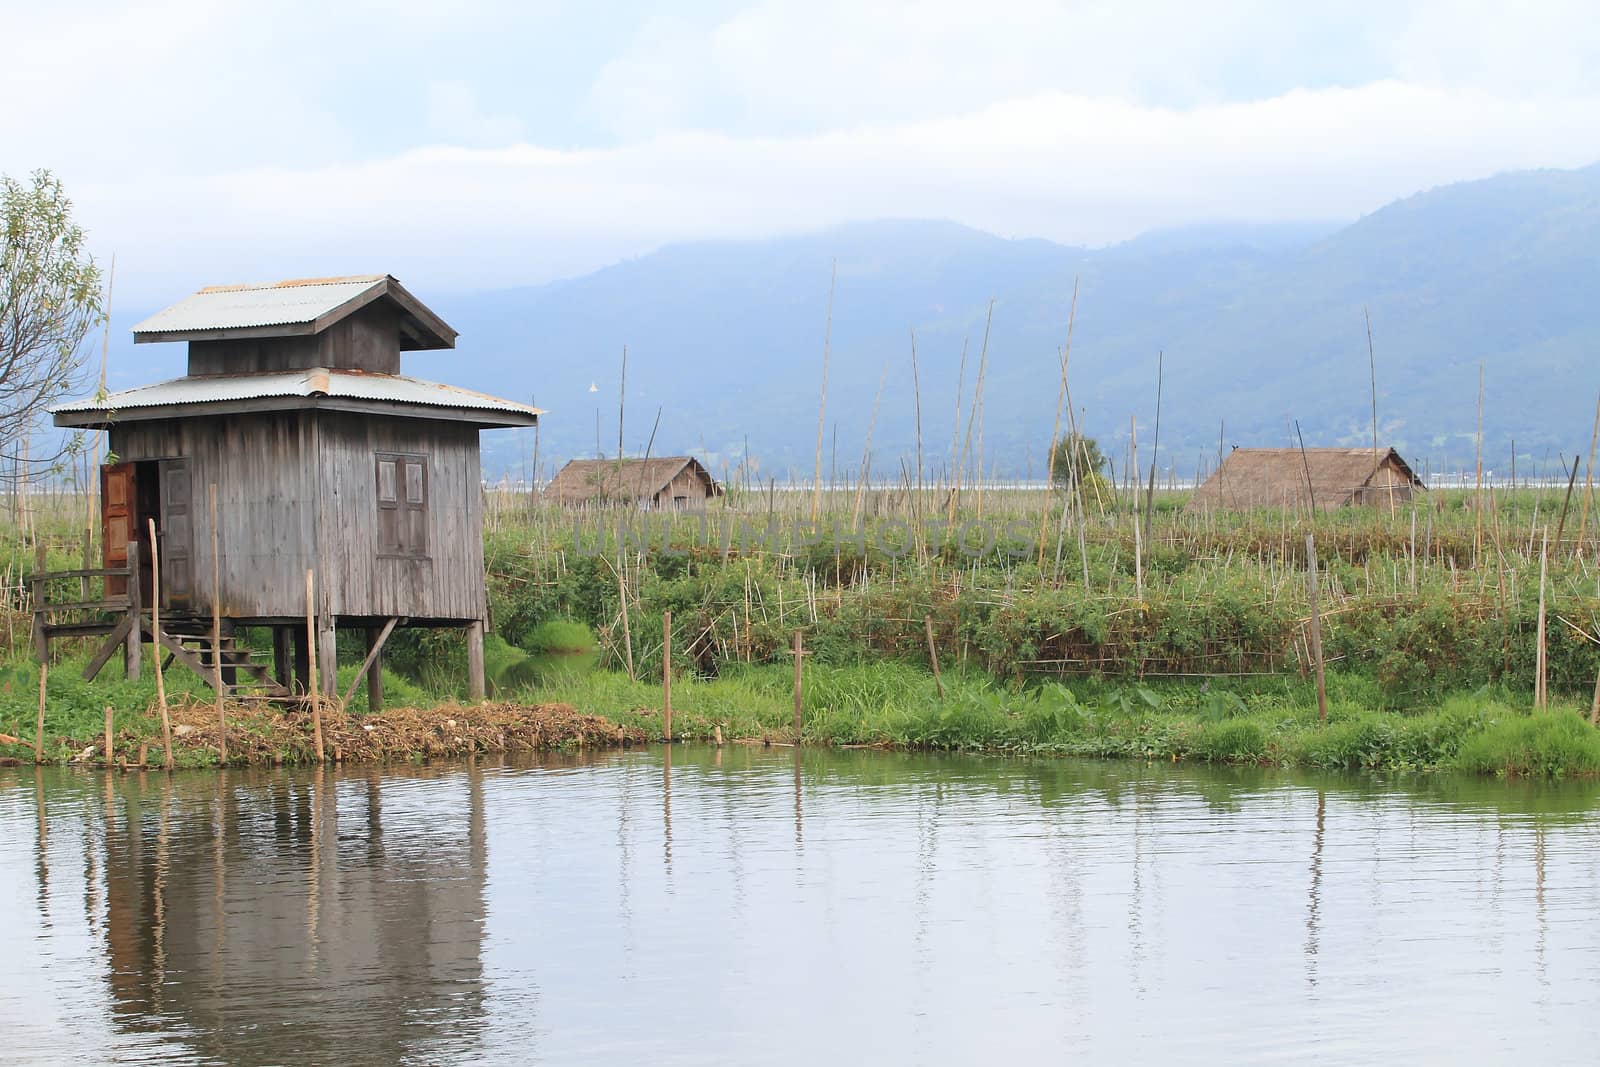 Inle Lake is a freshwater lake located in the Shan Hills in Myanmar (Burma).